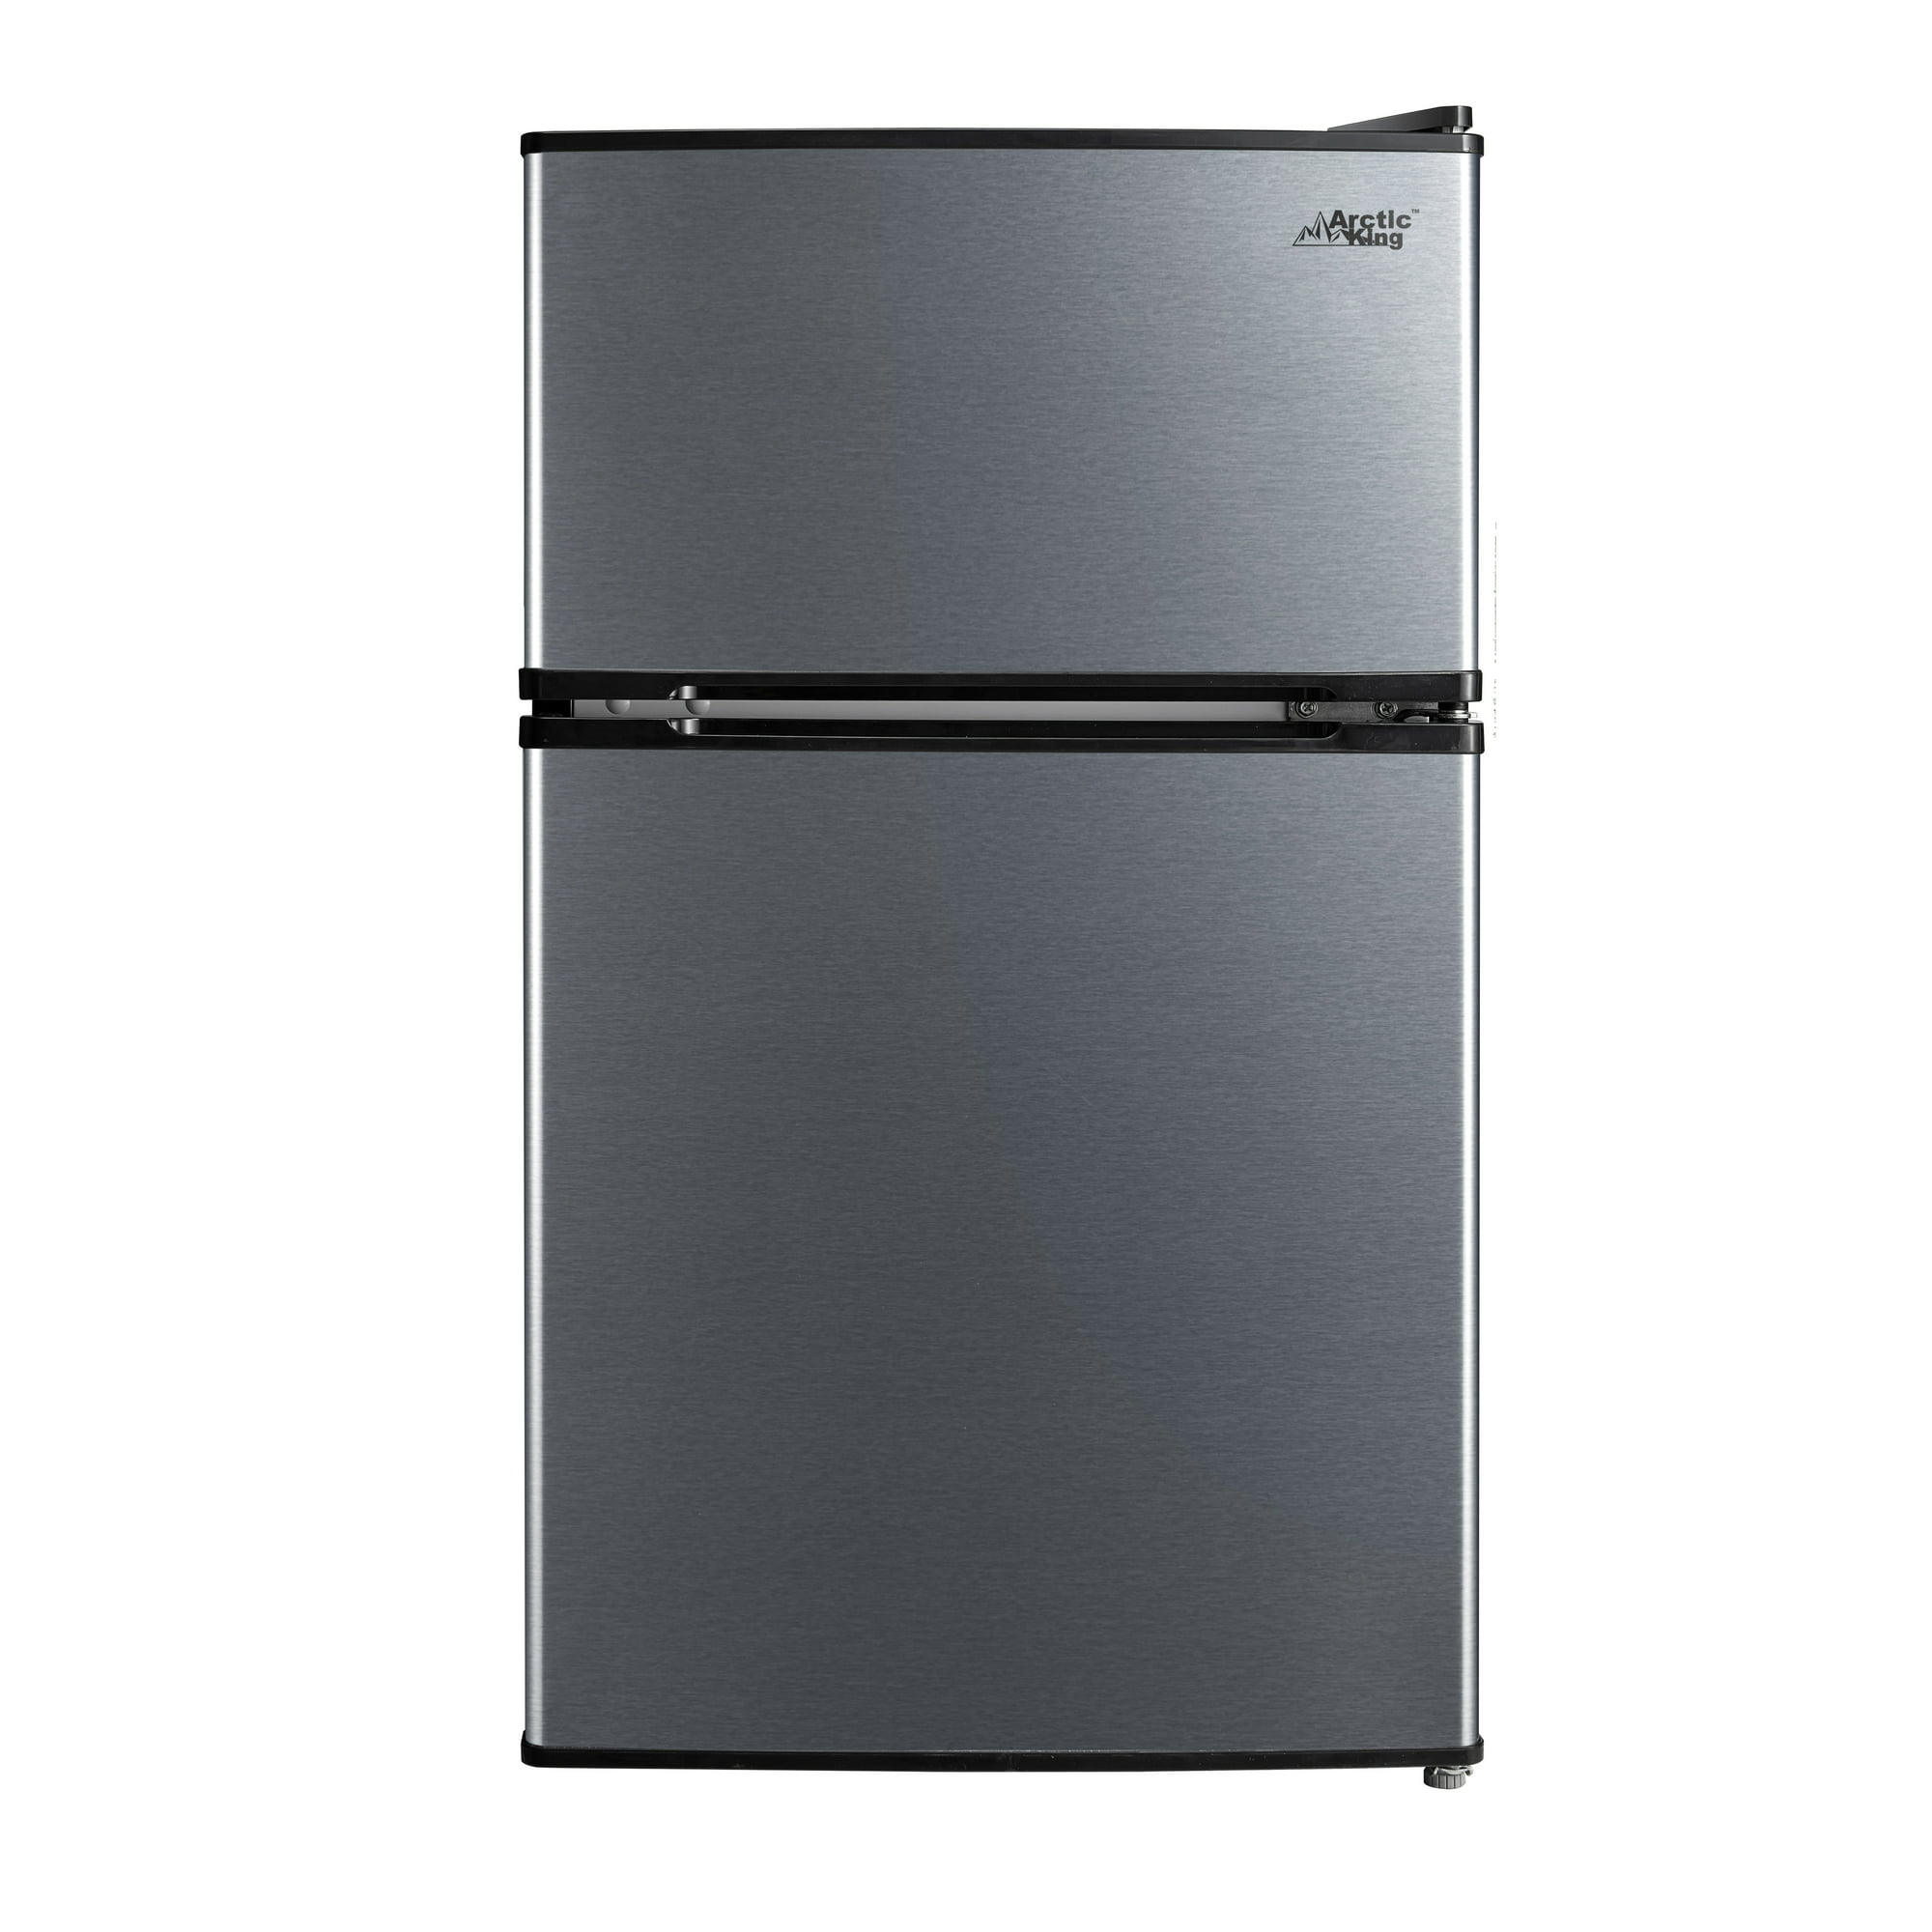 3.2-Cu Ft Arctic King Two Door Compact Refrigerator w/ Freezer (Stainless Steel, Black) $128 + Free Shipping